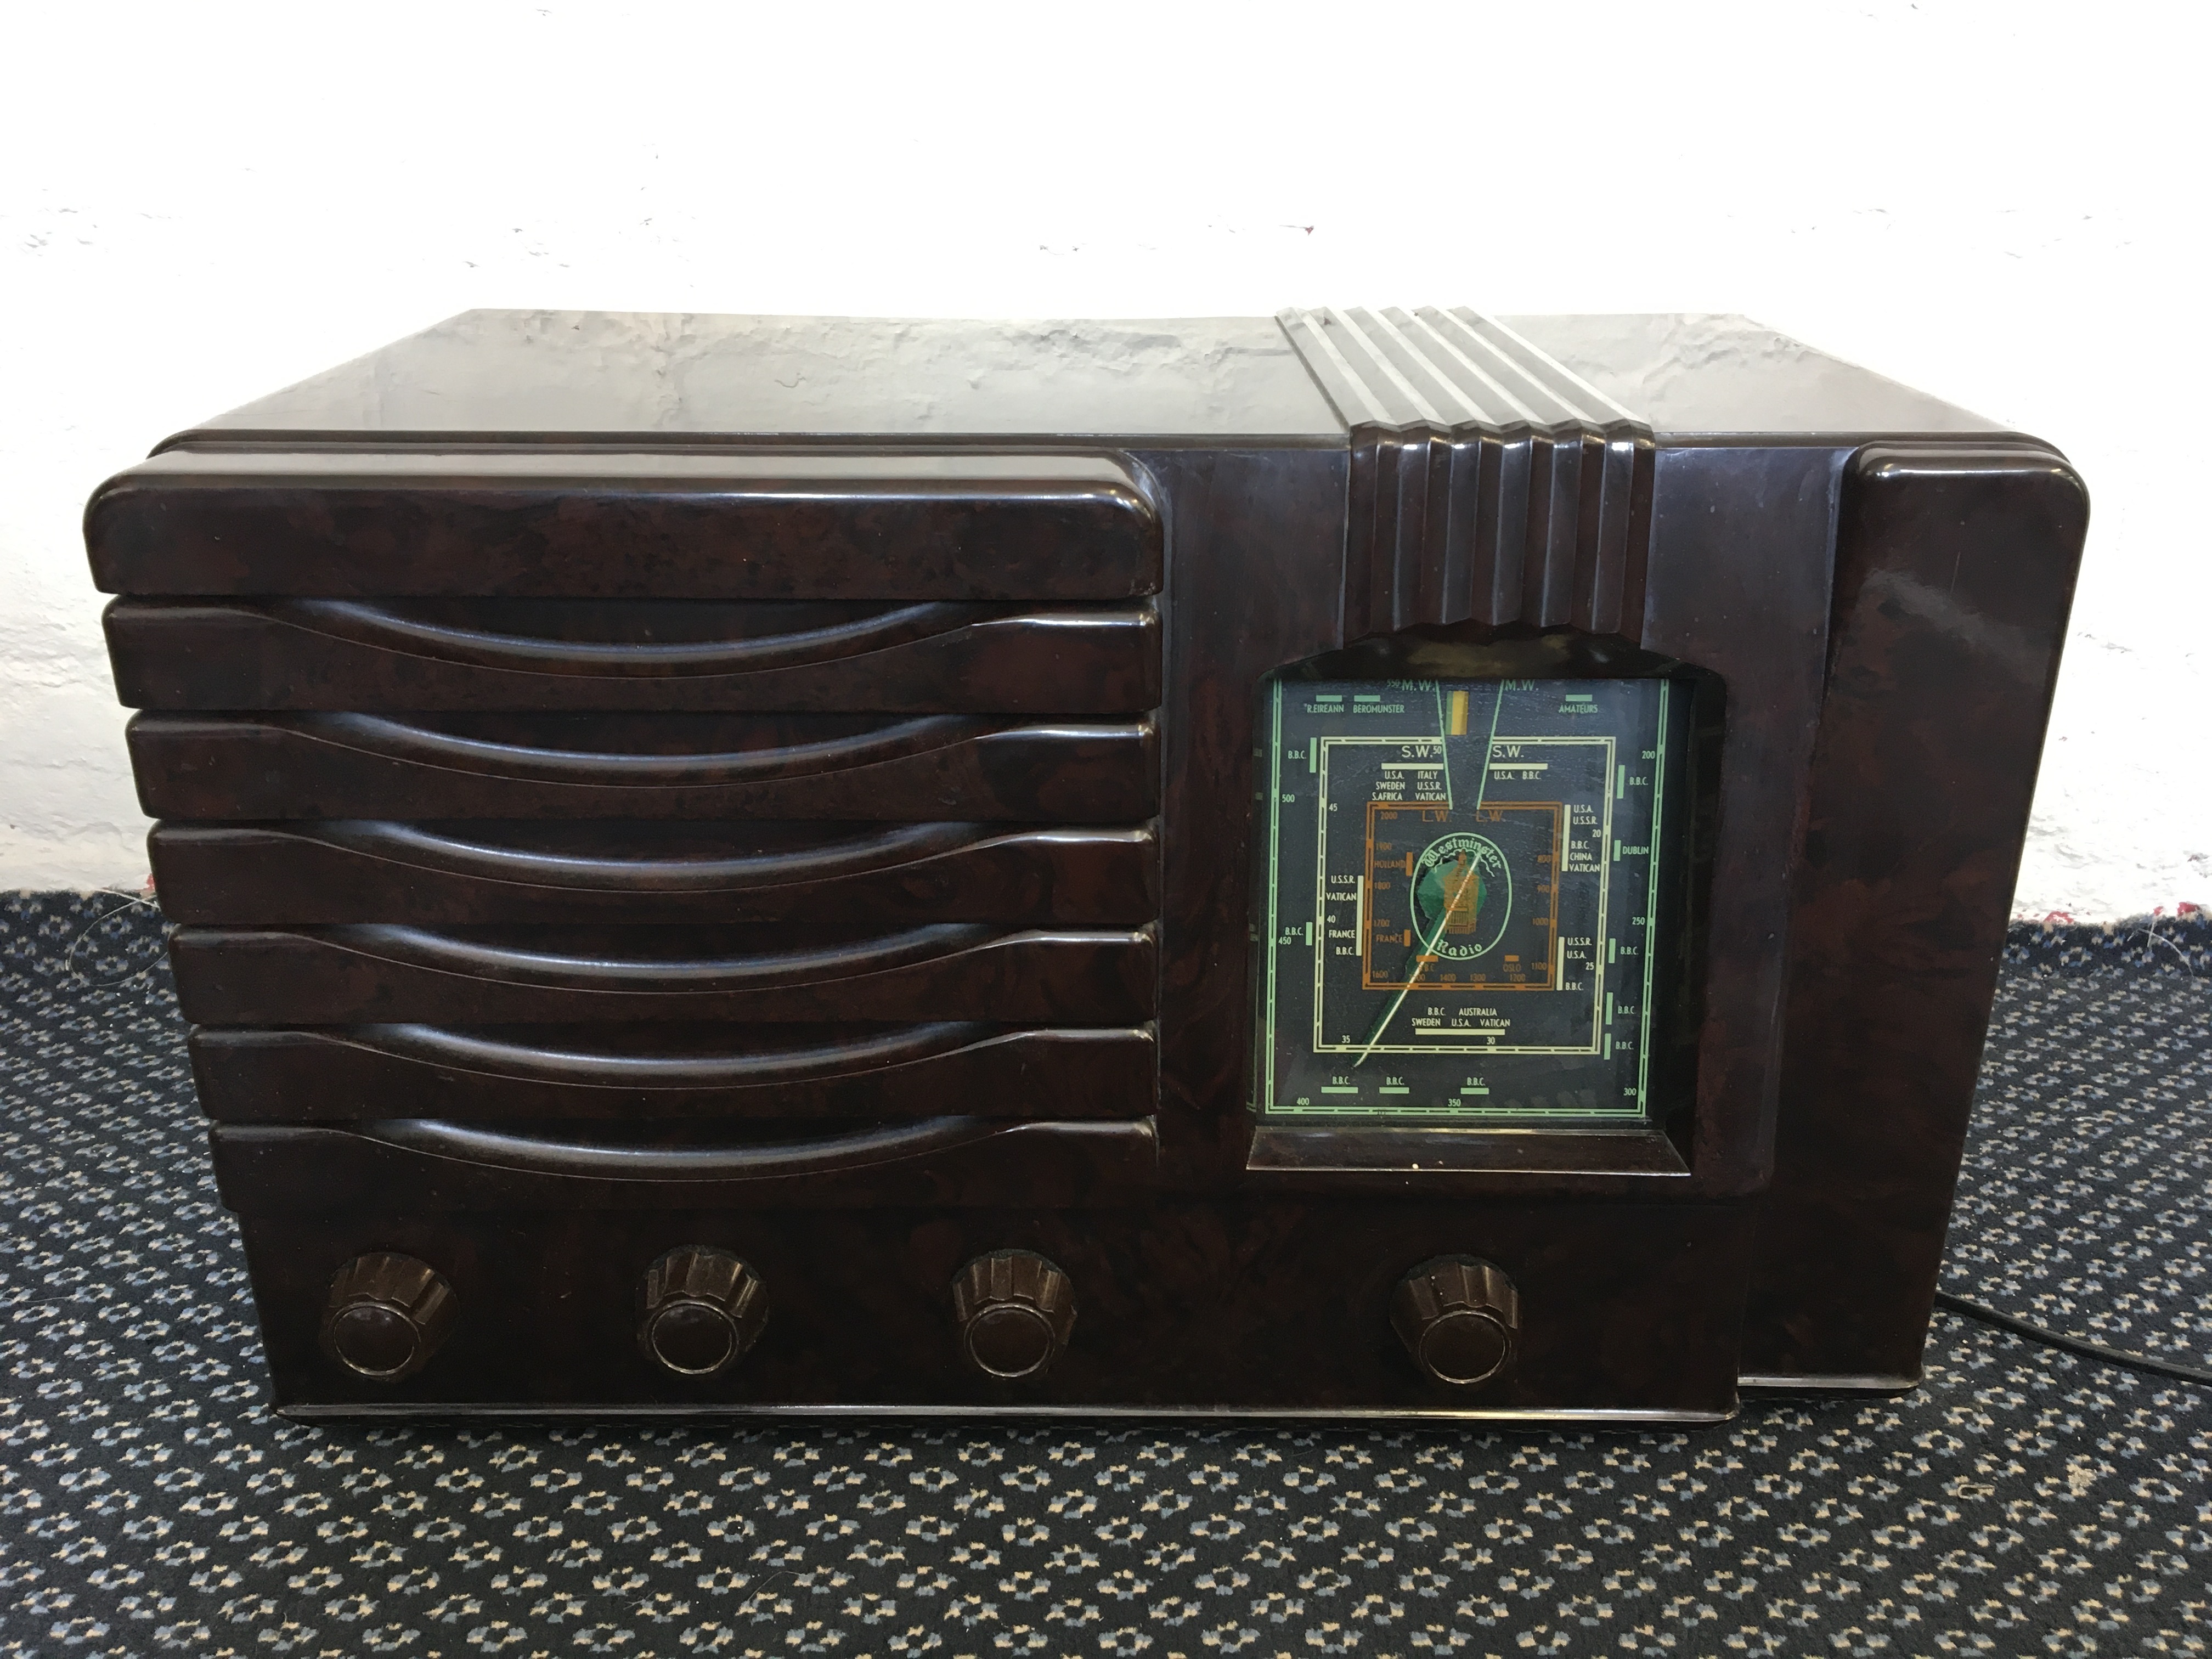 A Westminster model R.W.R 2/1 radio. IMPORTANT: Online viewing and bidding only. No in person